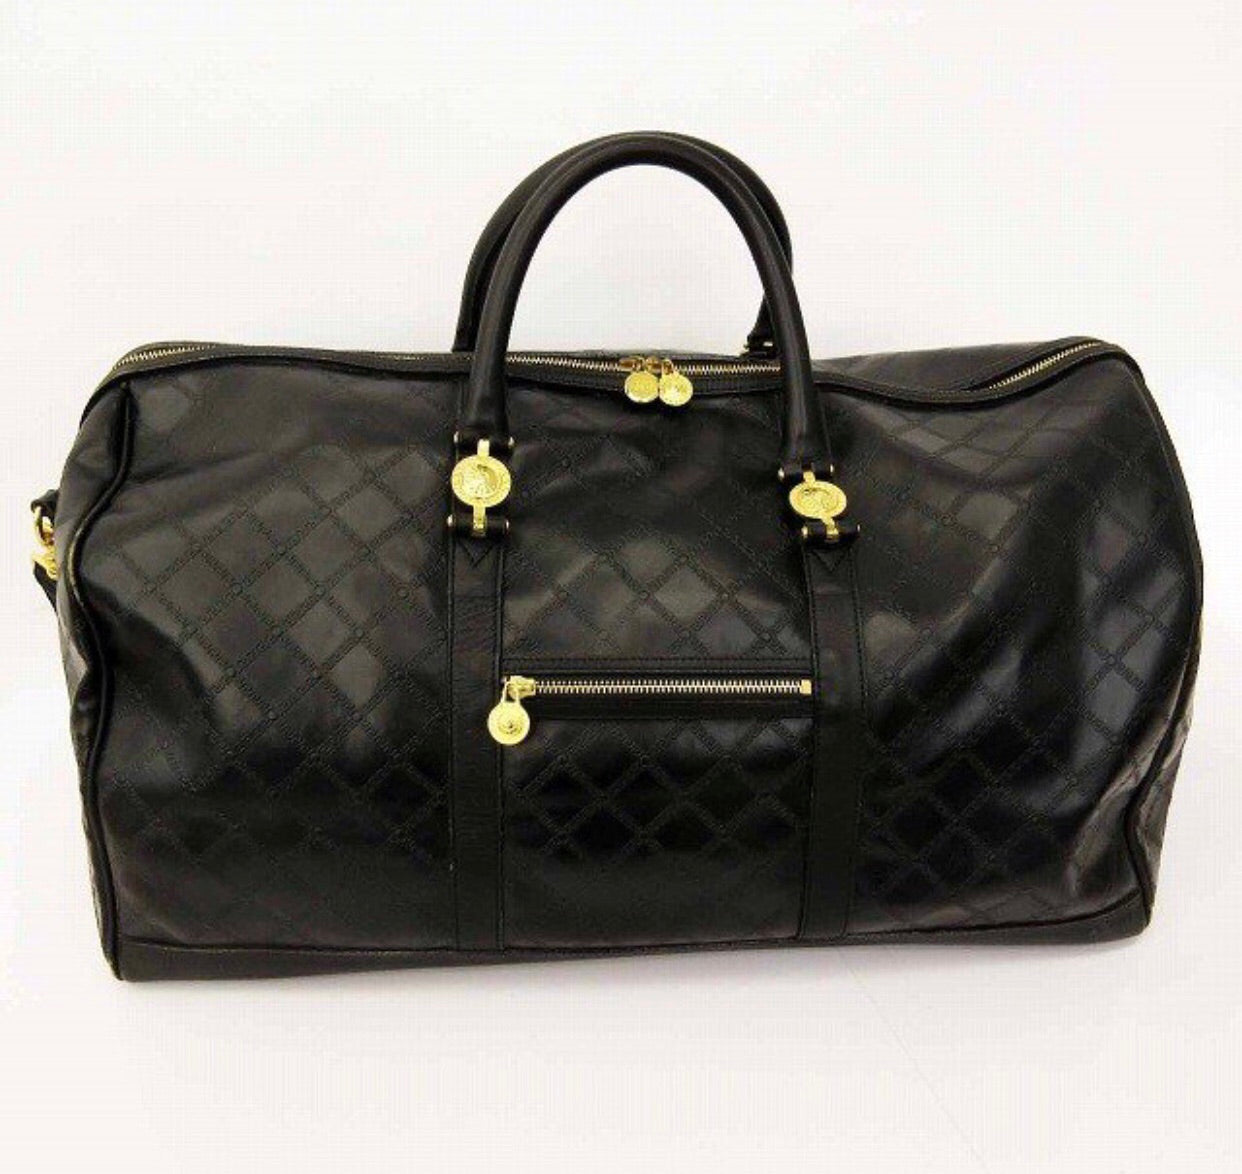 Vintage Gianni Versace genuine black leather travel bag with